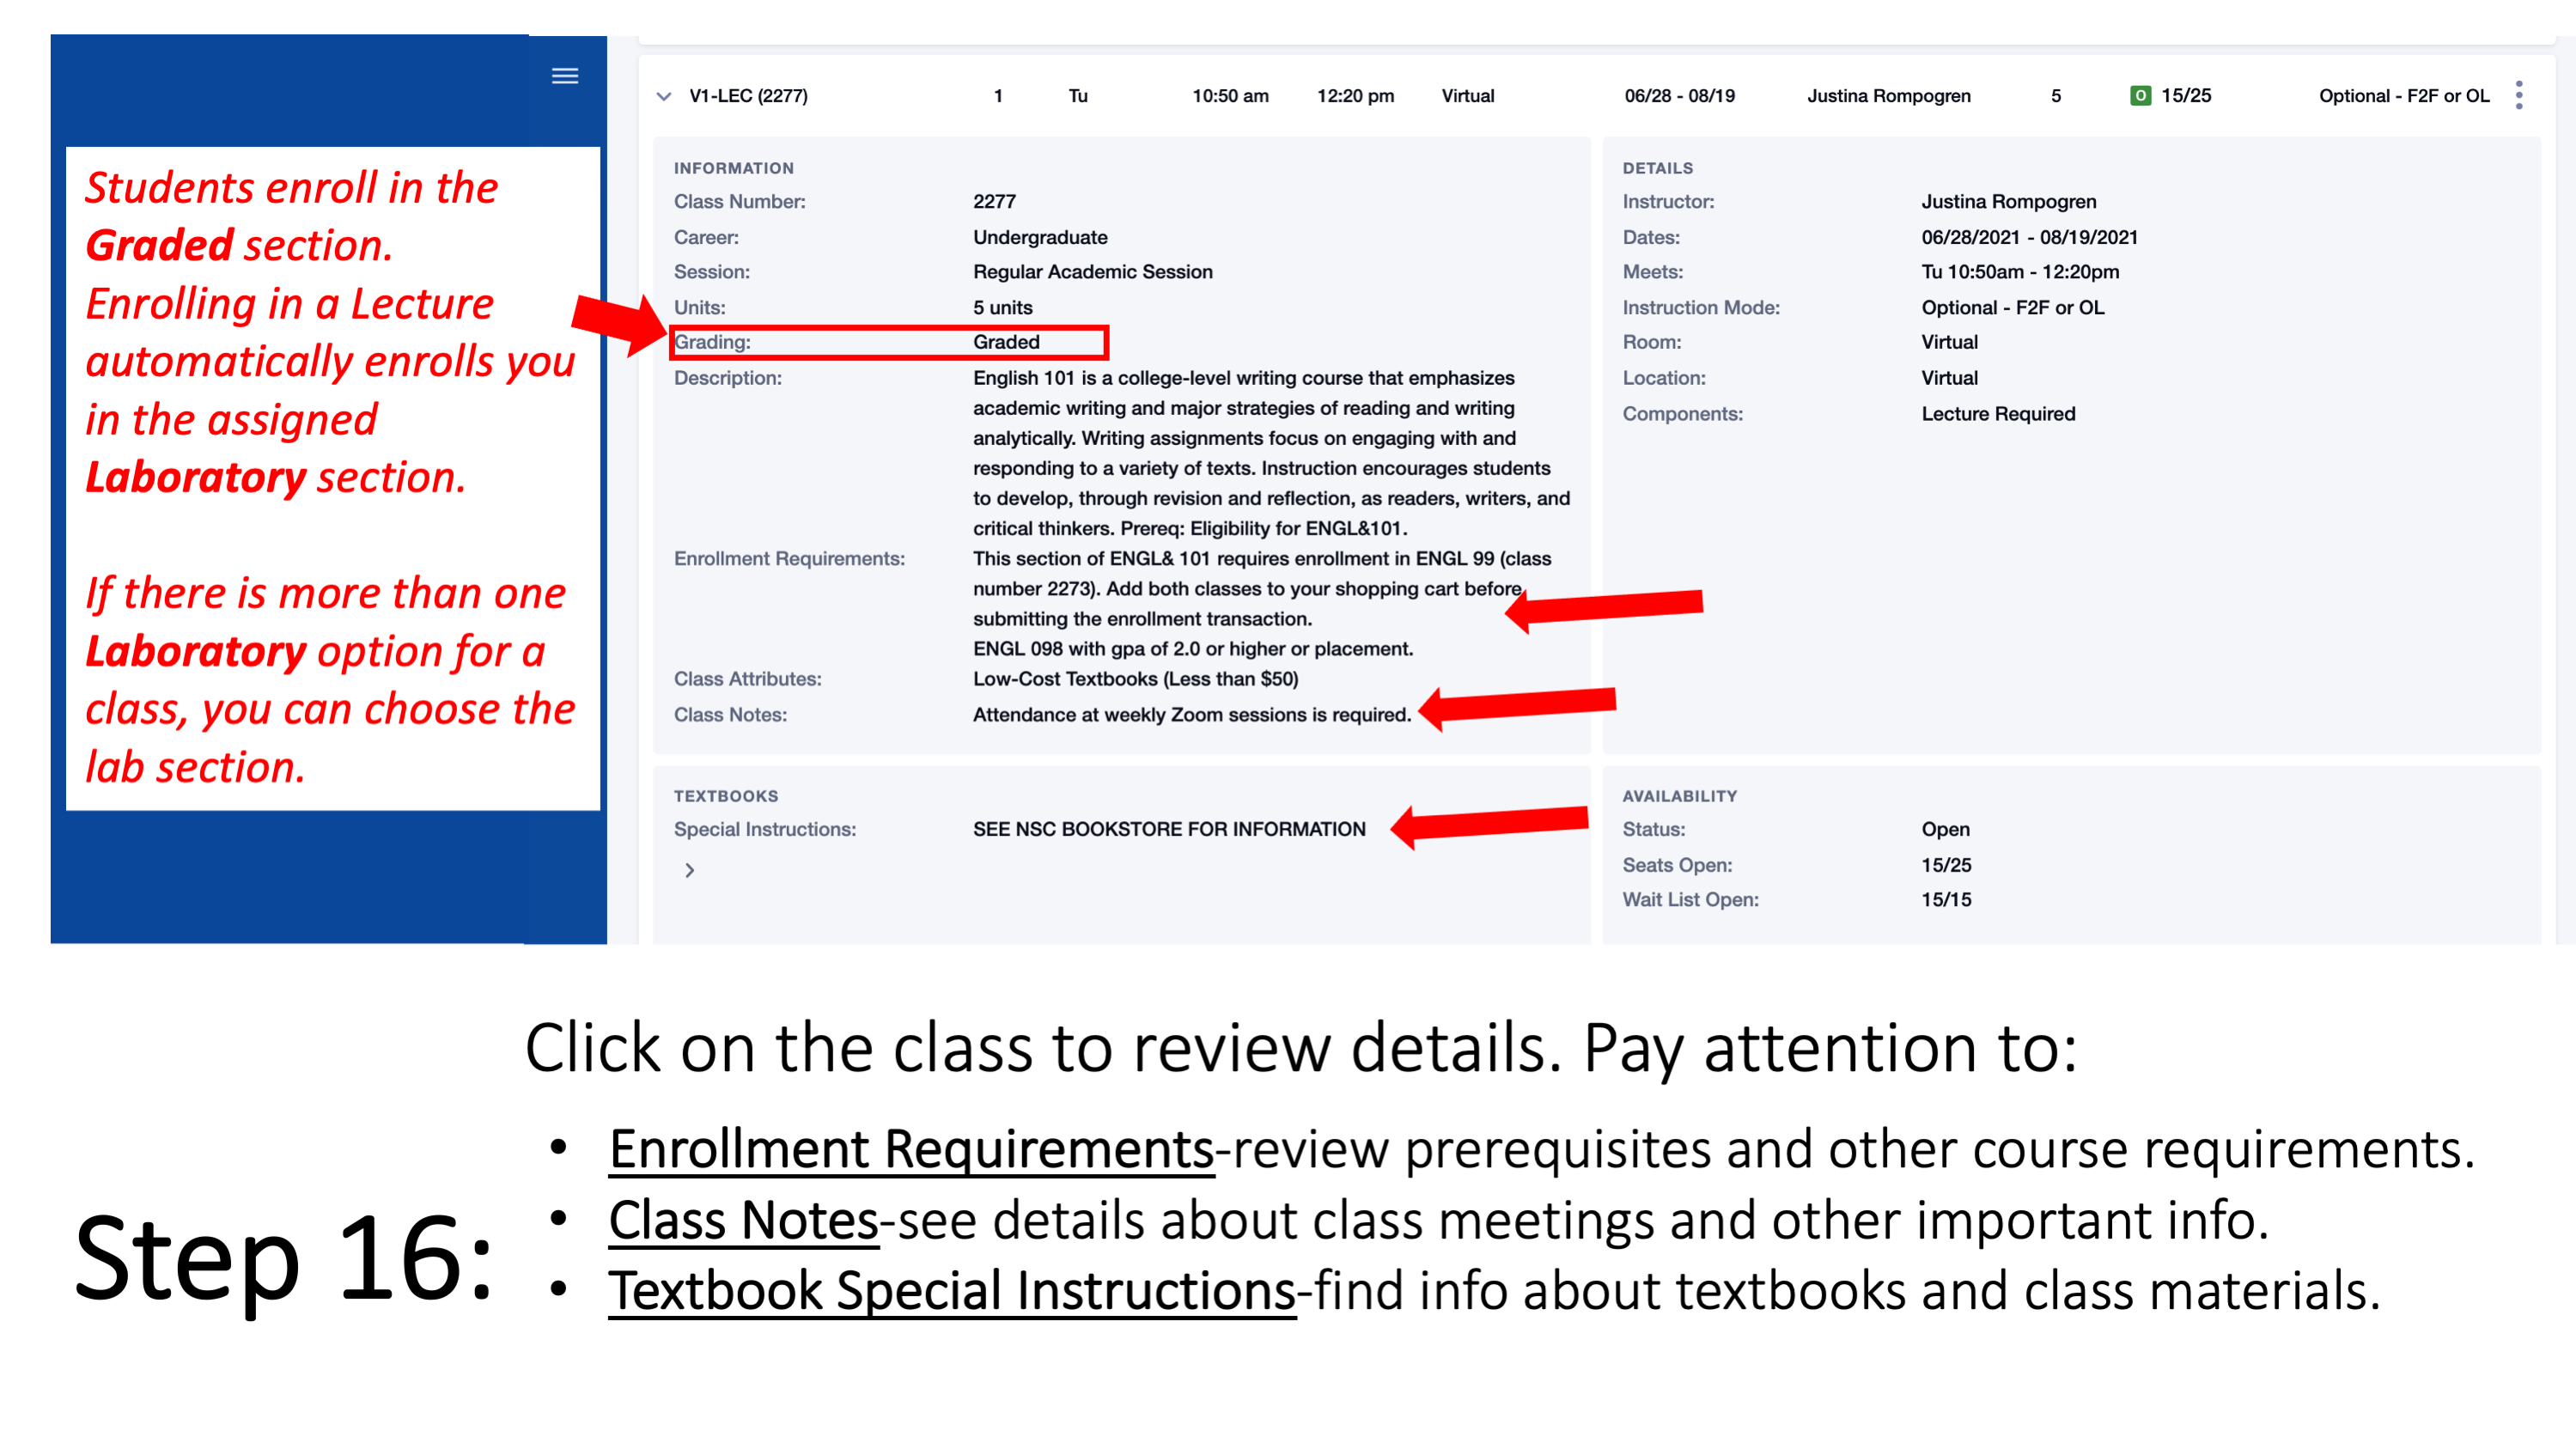 Step 16: Click on the class to review details. Pay attention to: Enrollment Requirements-review prerequisites and other course requirements; Class Notes-see details about class meetings and other important info; Textbook Special Instructions-find info about textbooks and class materials.